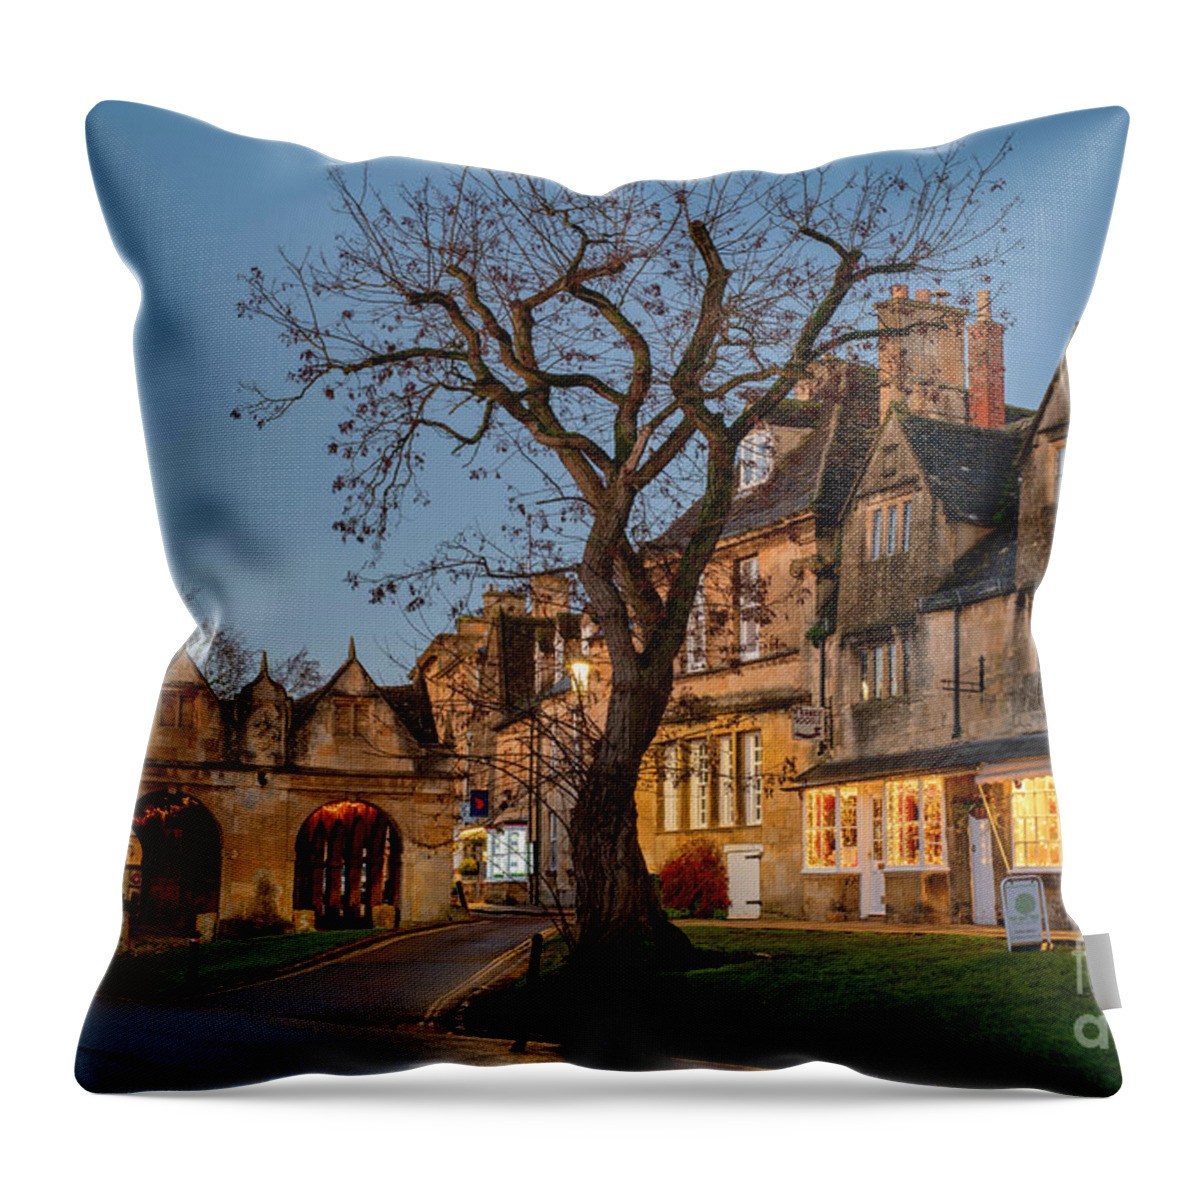 Chipping Campden Throw Pillow featuring the photograph Chipping Campden Daybreak at Christmas by Tim Gainey